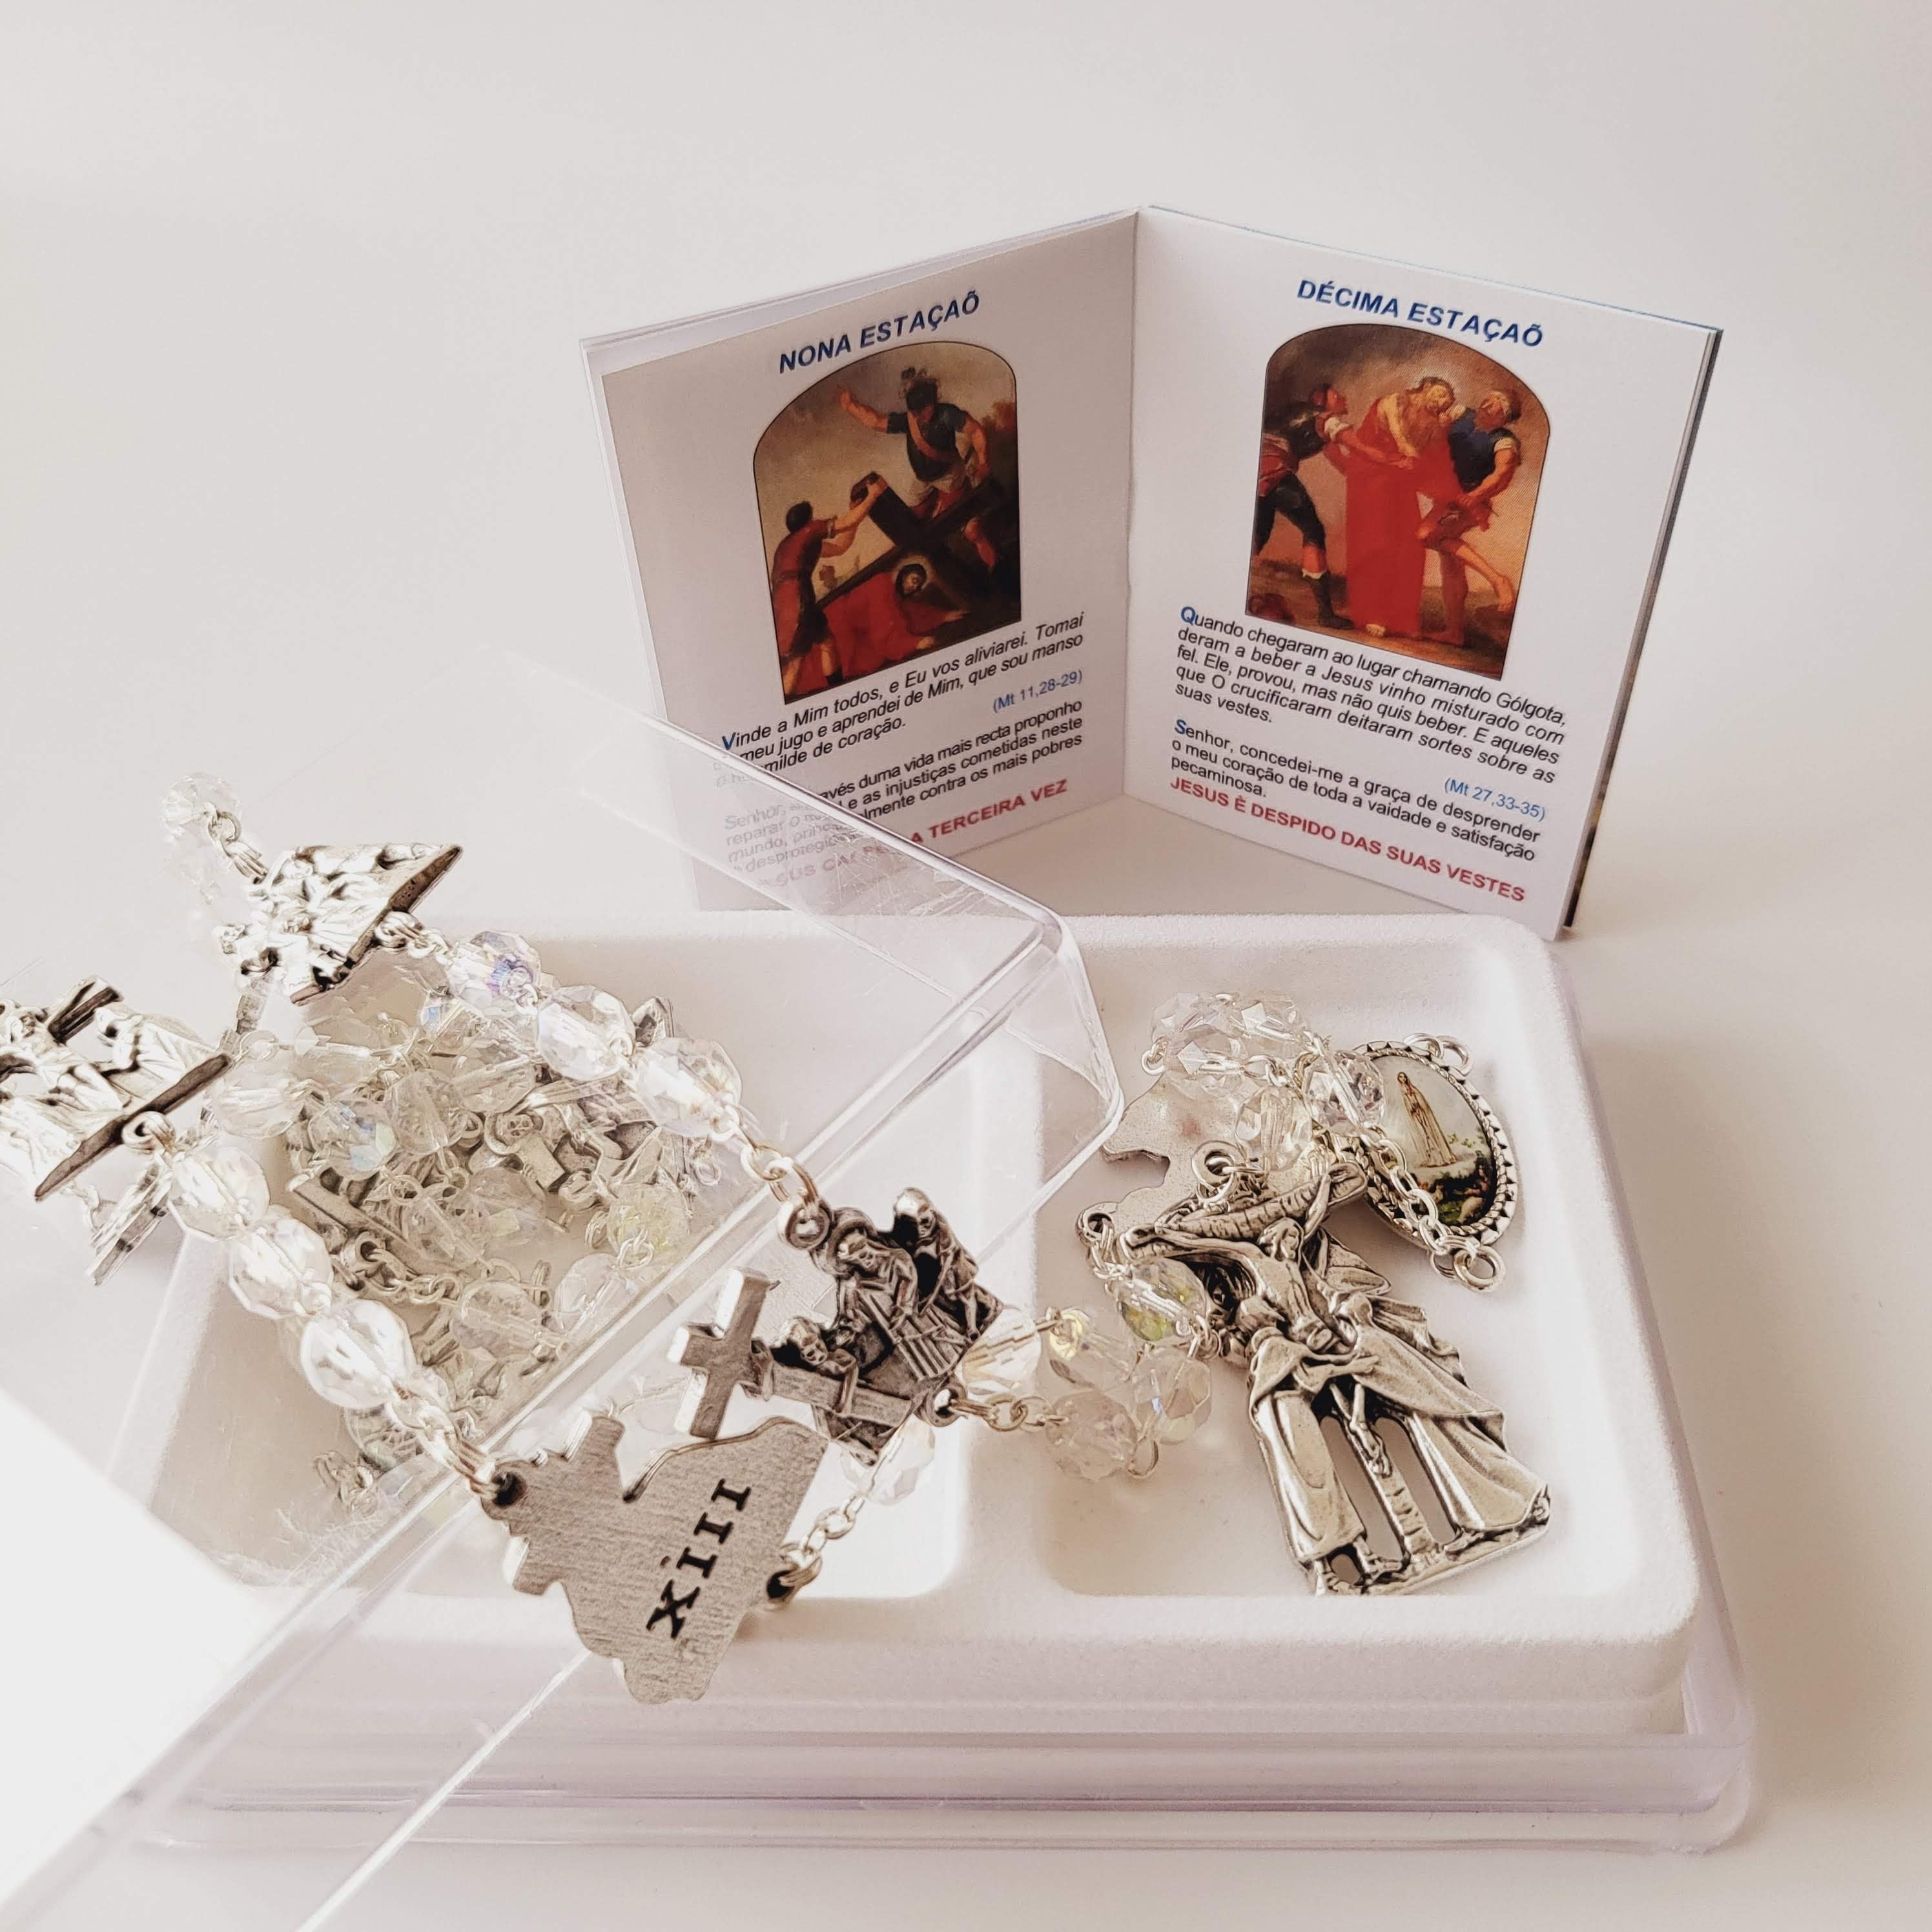 Stations of the Cross Crystal Rosary